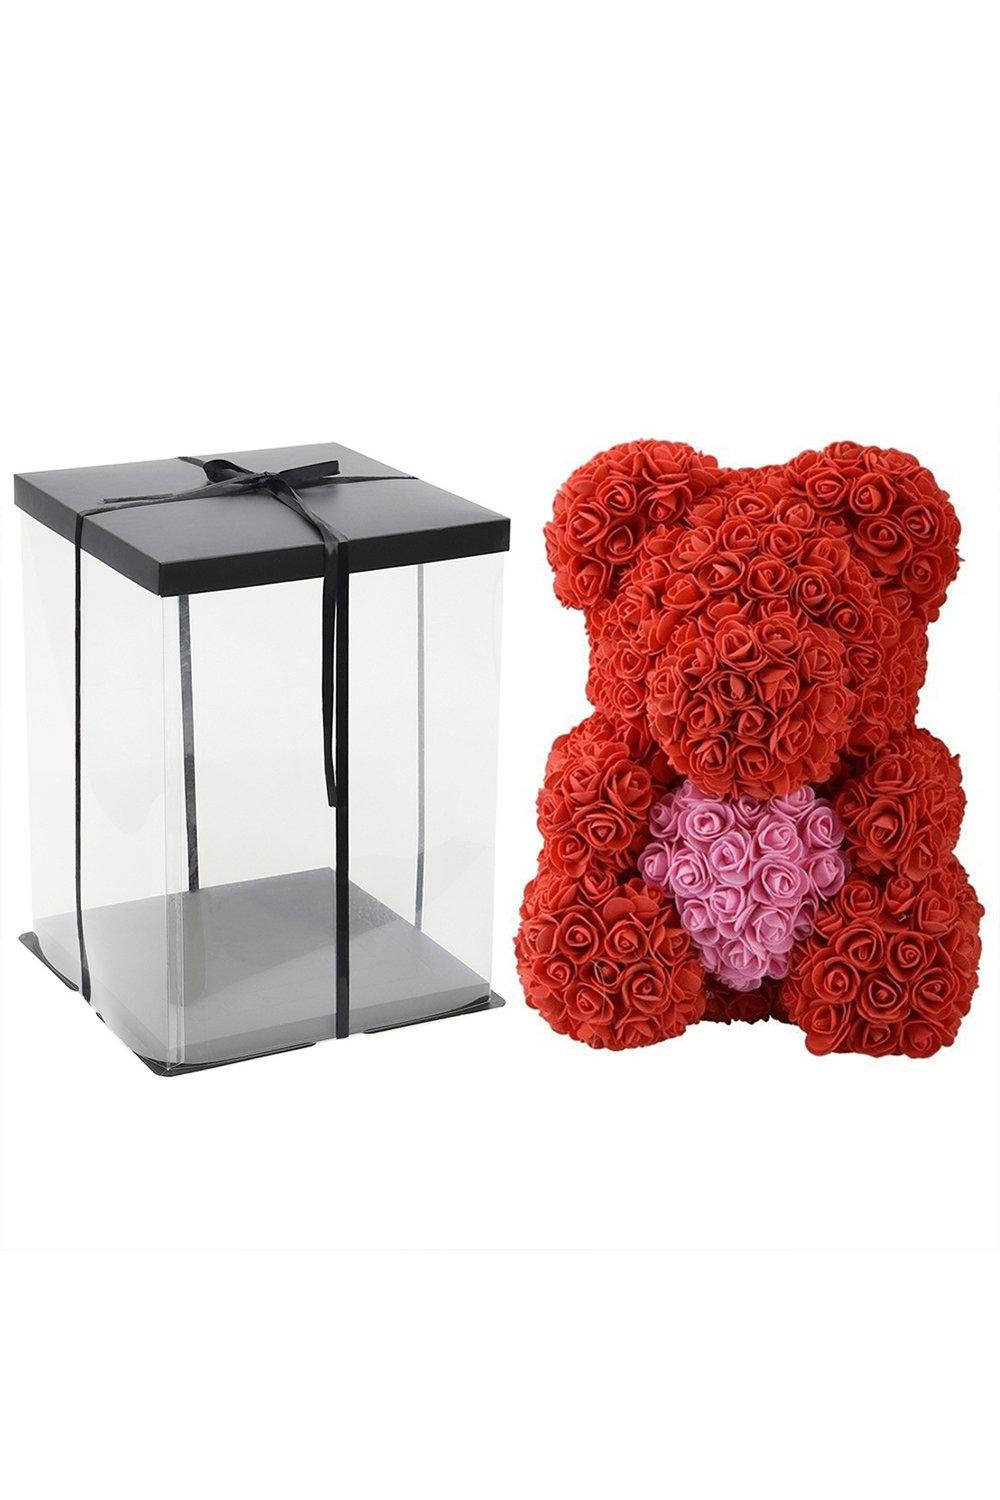 Artificial Rose Heart Teddy Bear with Gift Box